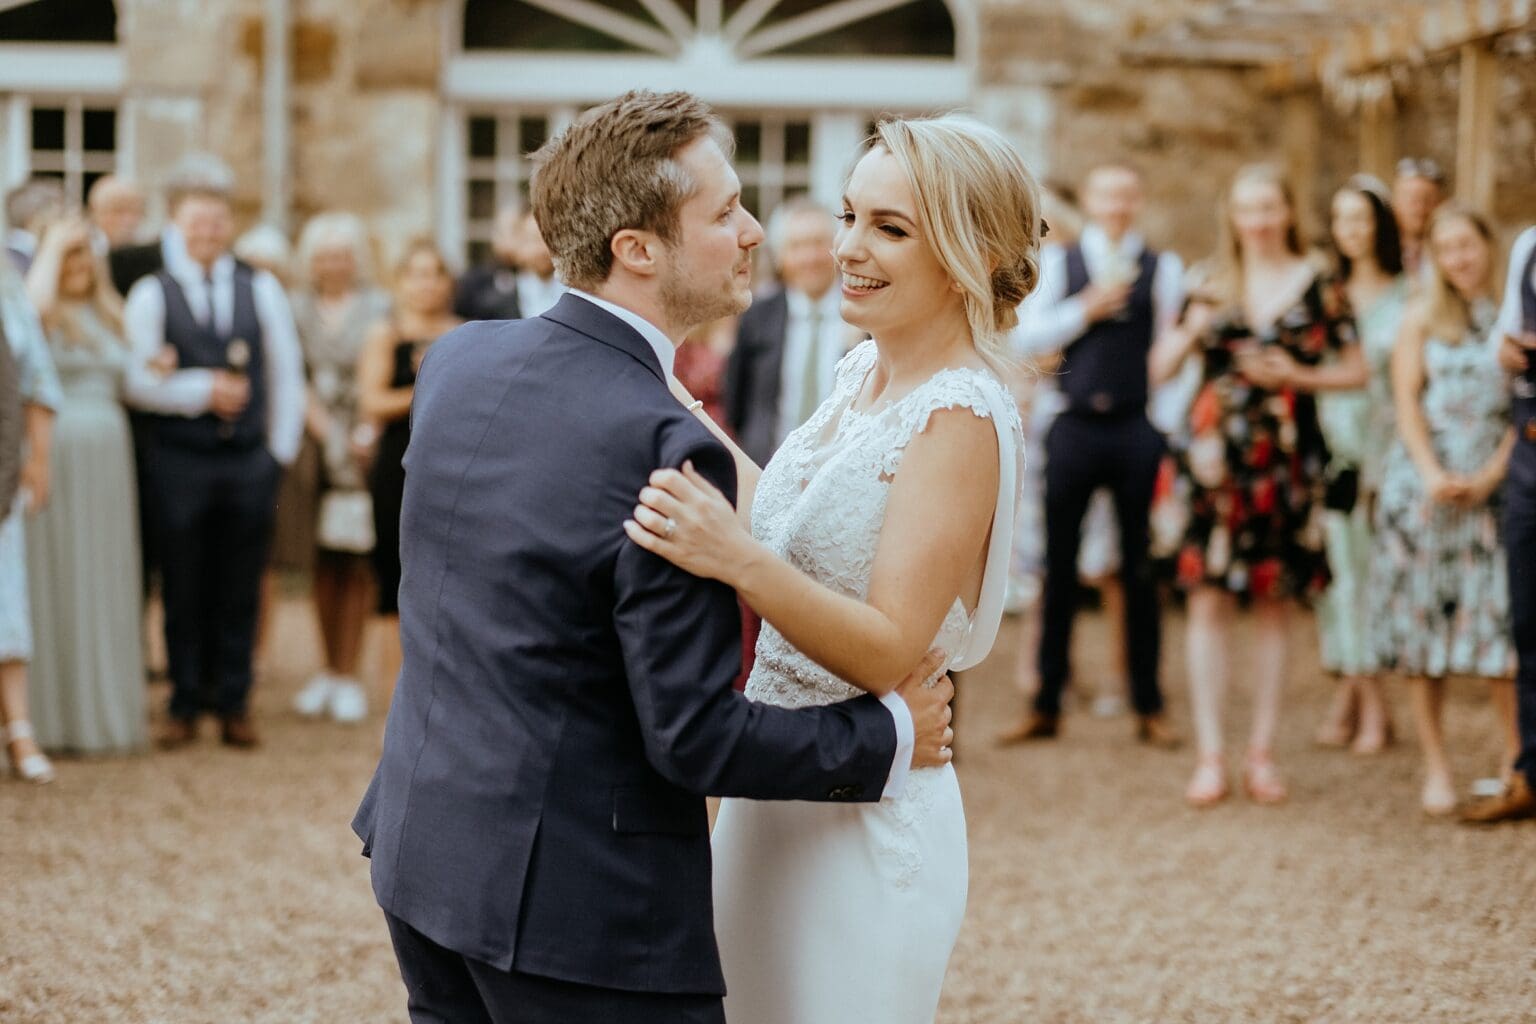 bride and groom first dance in courtyard with guests in background colstoun house wedding cost unique wedding venue scotland